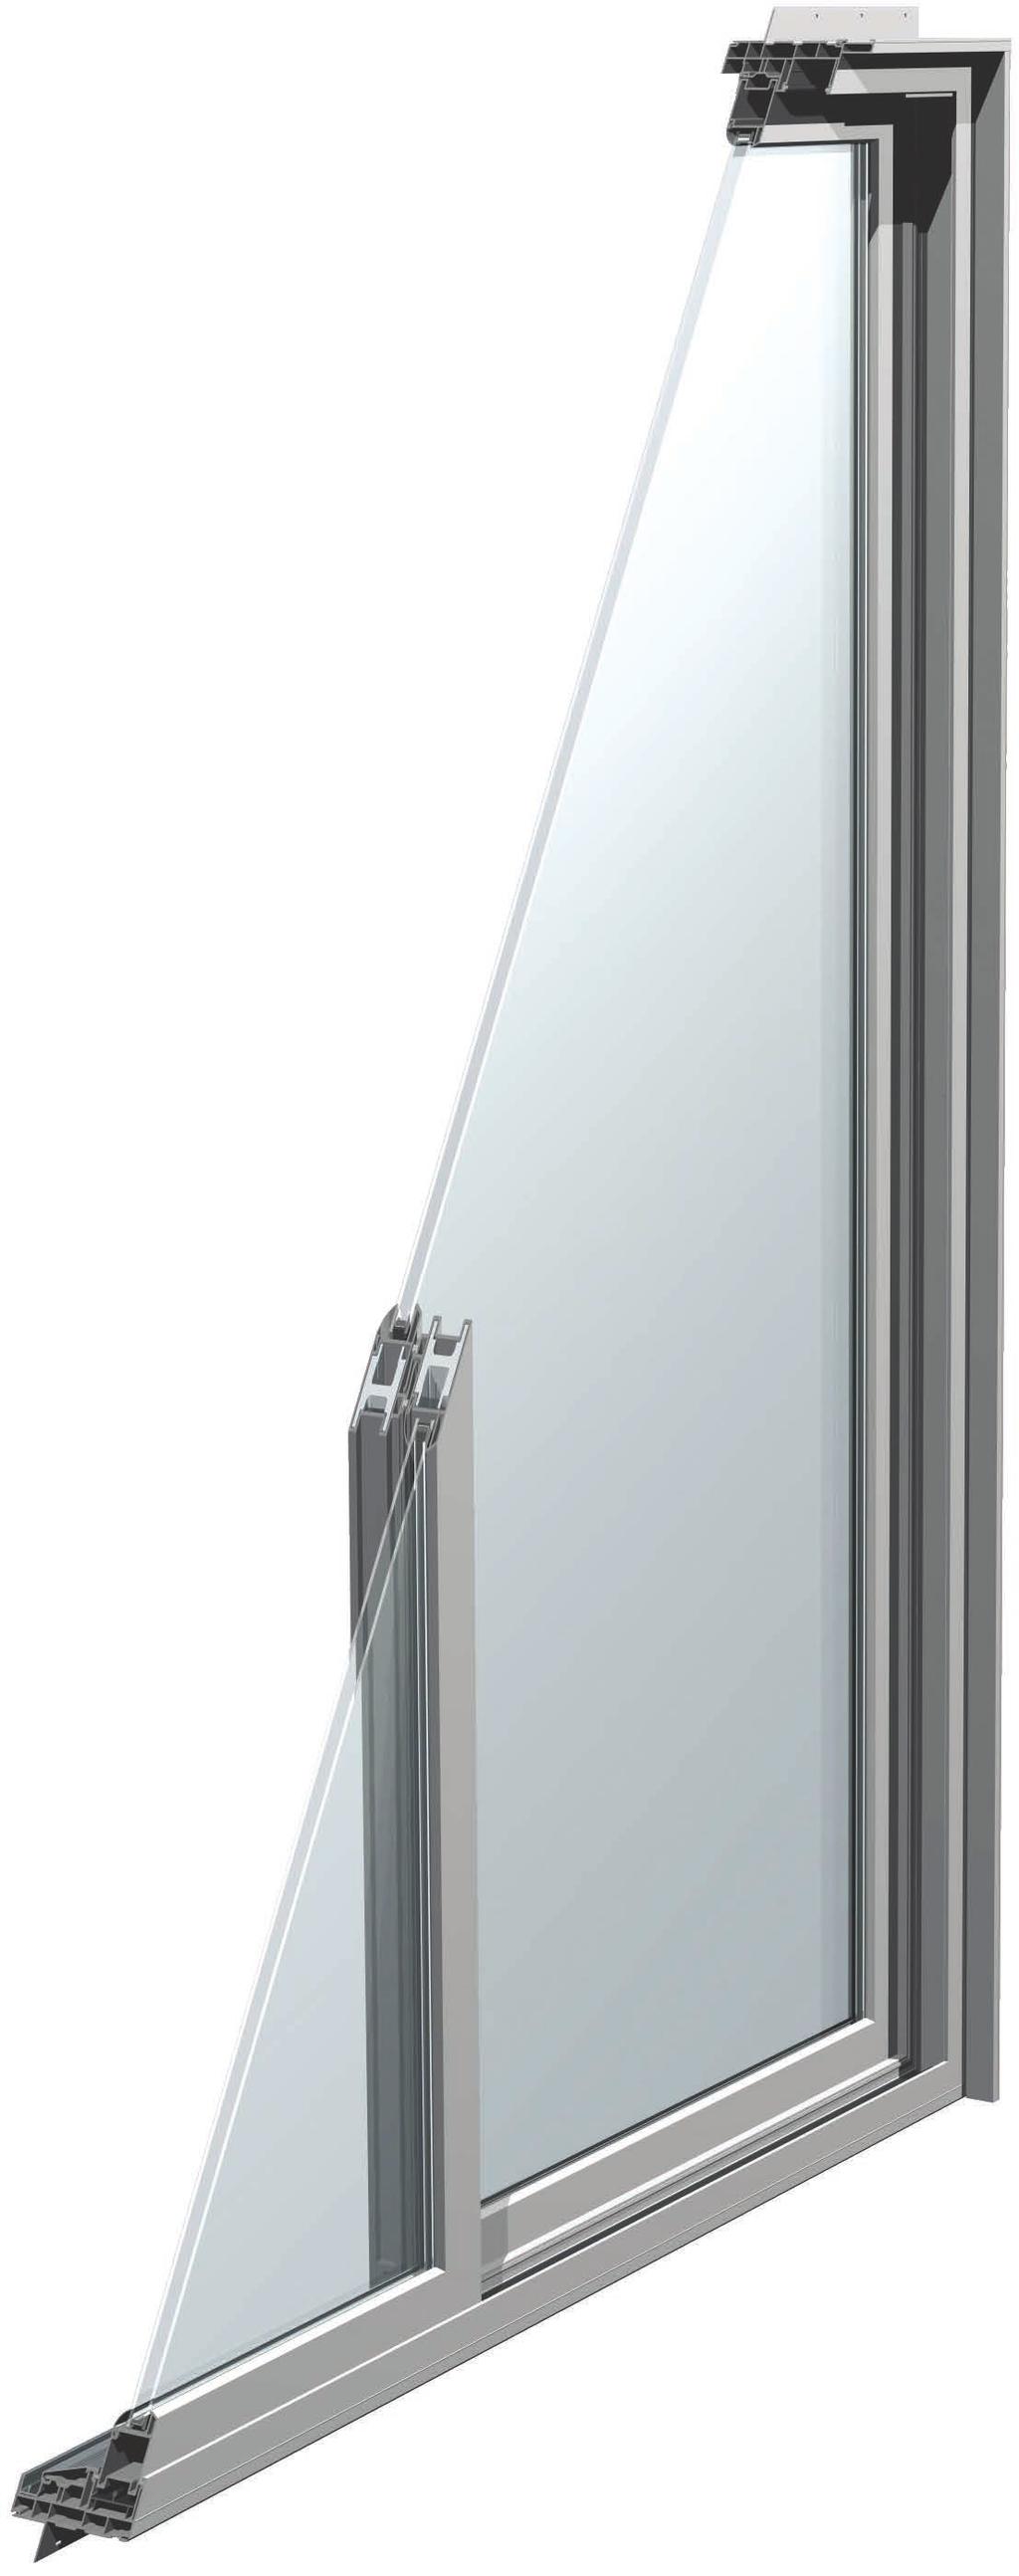 CLSSIC SLIDING PTIO DOOR 1 W 20 YER GLSS R R N Y T SGD R50 2 3 FETURES 1 Pre-punched nailing fin with fusionwelded corners